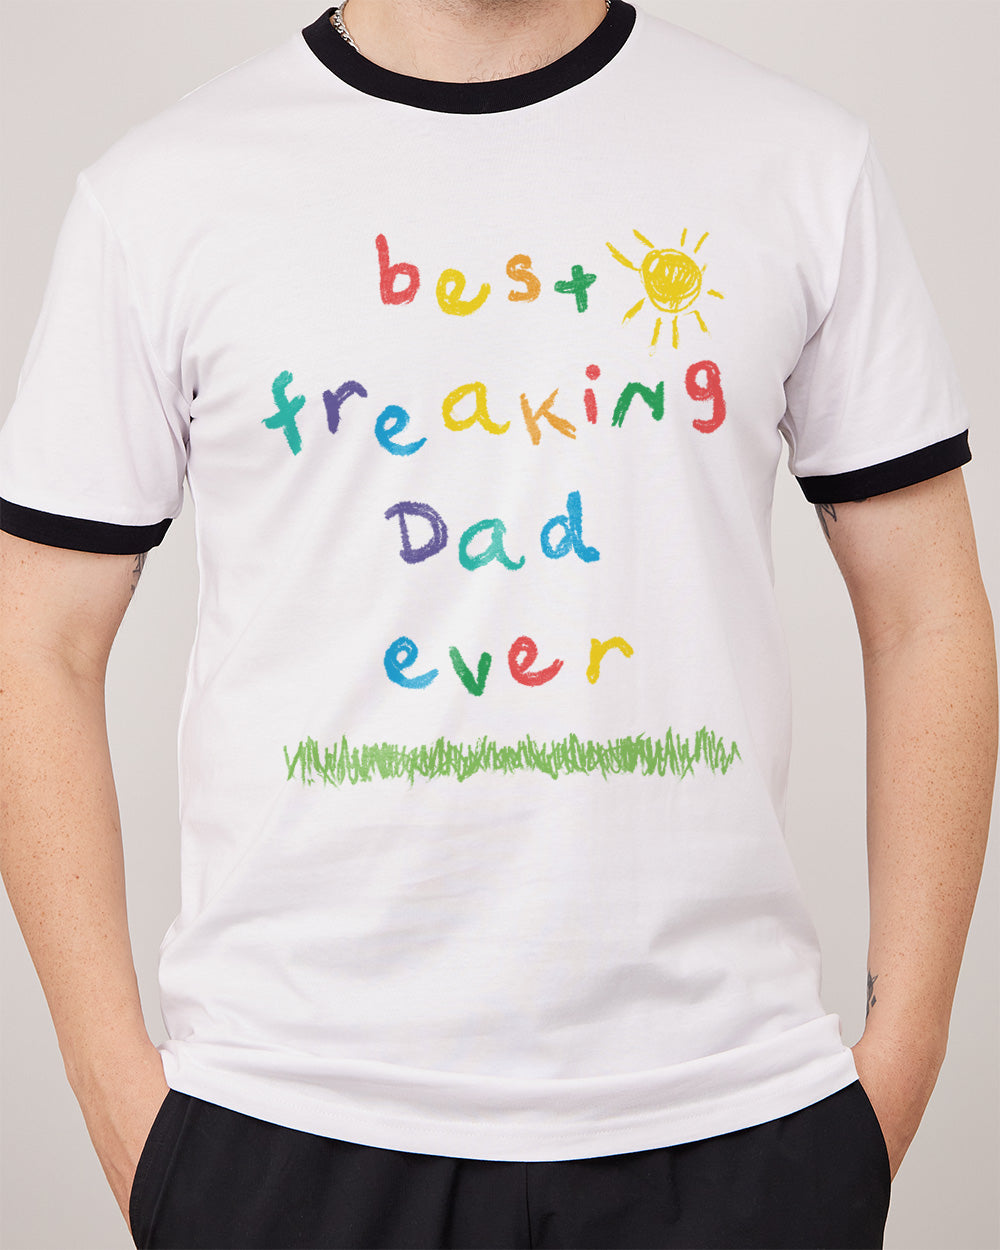 Best Freaking Dad Ever T-Shirt